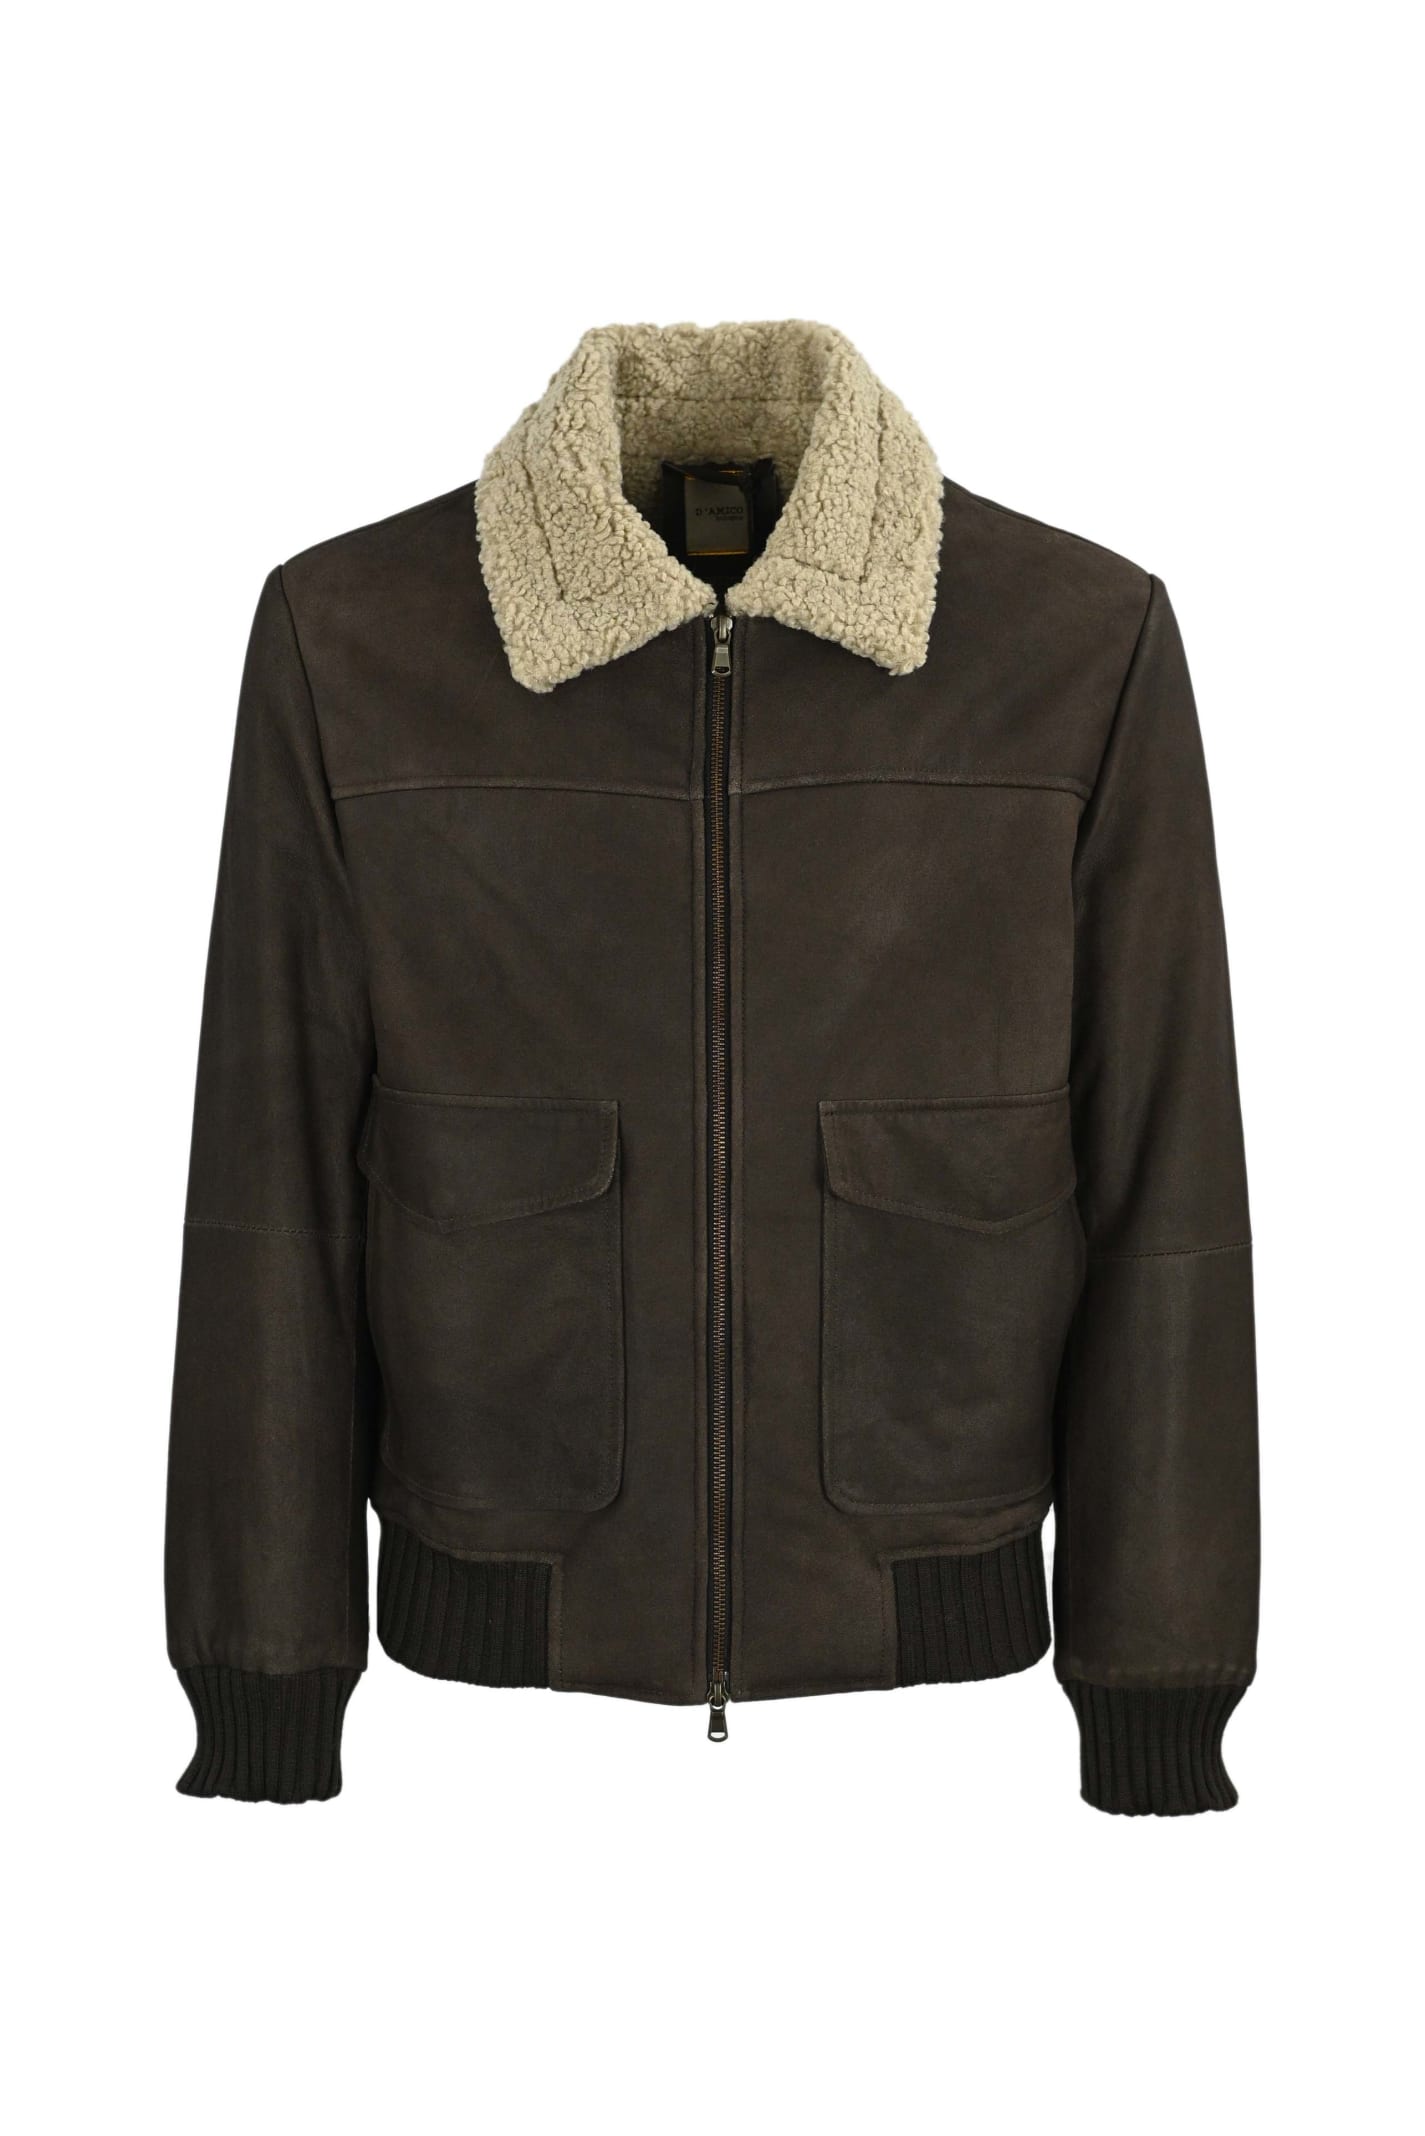 D'Amico Brown Sheep Bomber With Large Pockets And Wool Collar